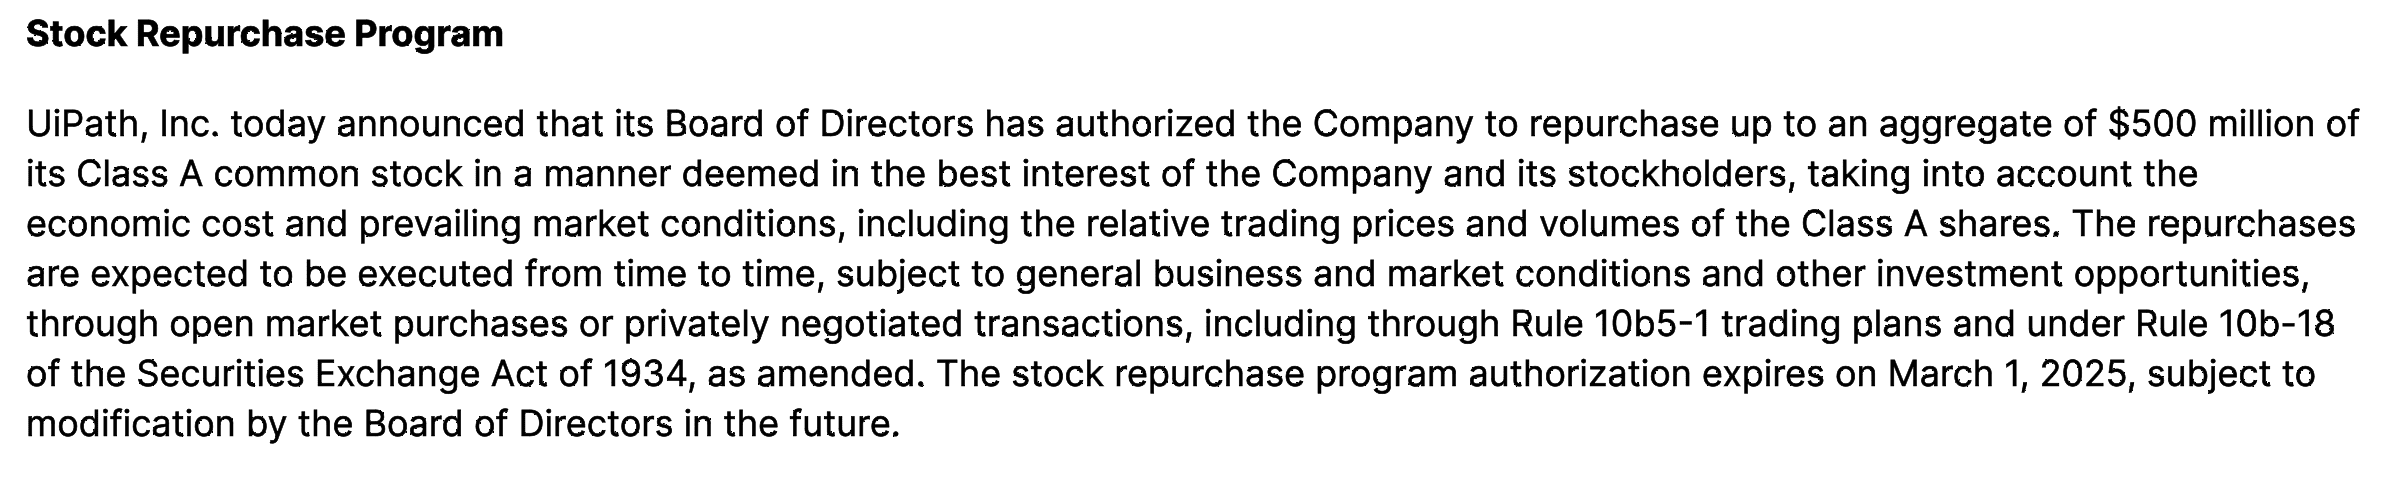 uipath stock jumps because of stock repurchase program